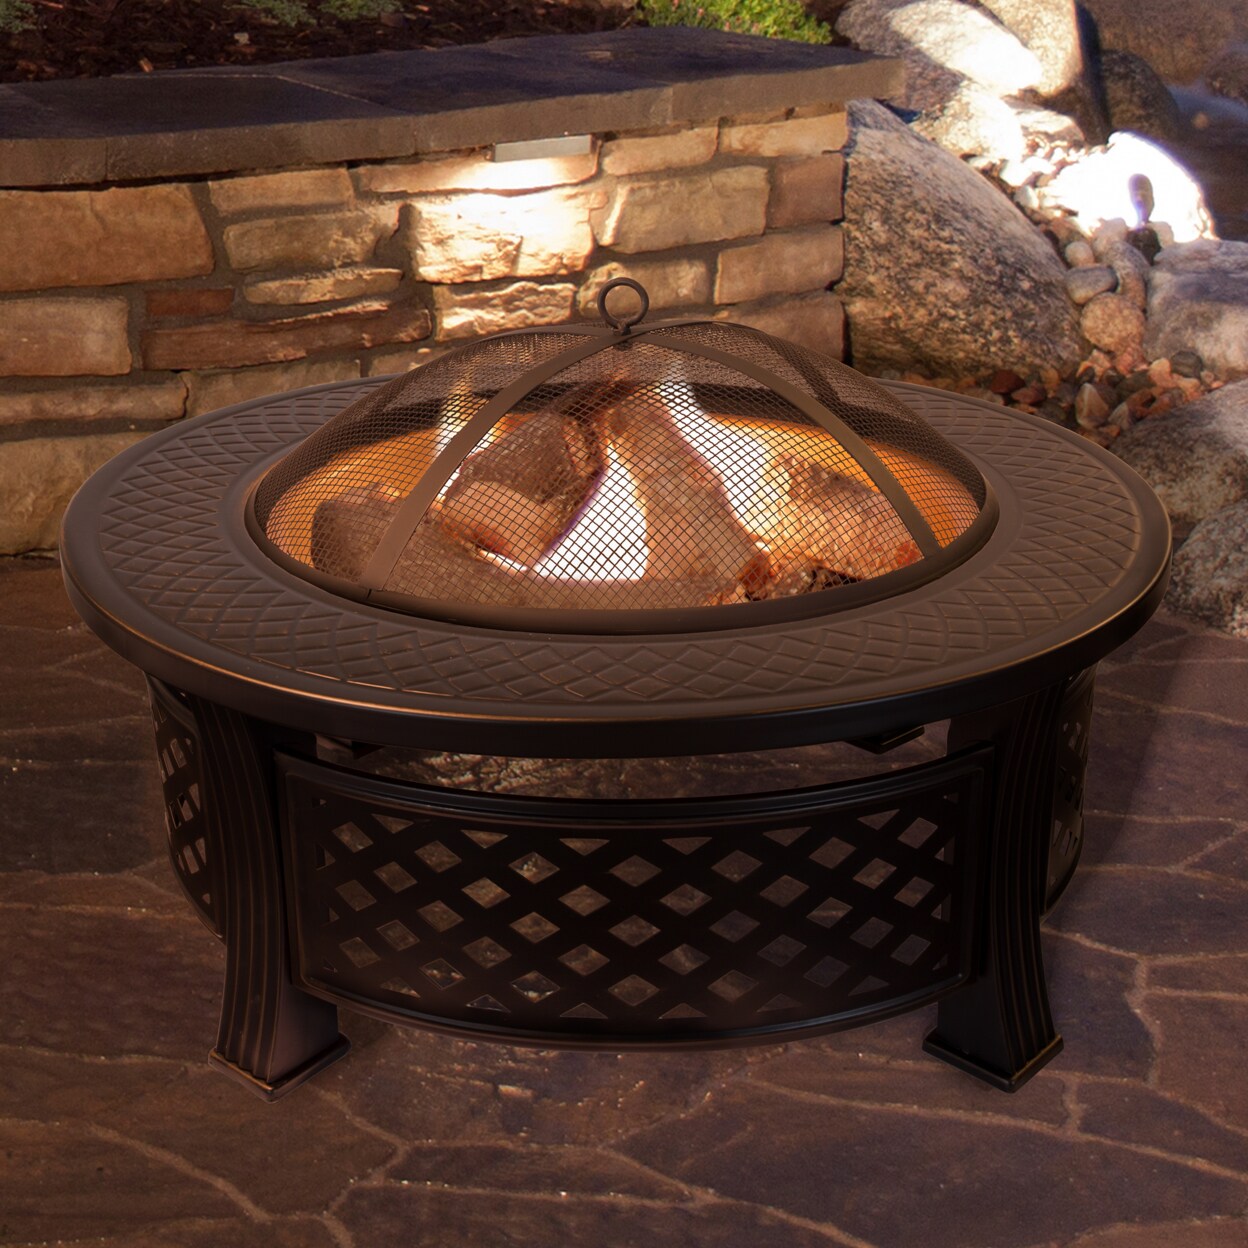 Pure Garden Wood Burning Fire Pit Set including Spark Screen and Log Poker